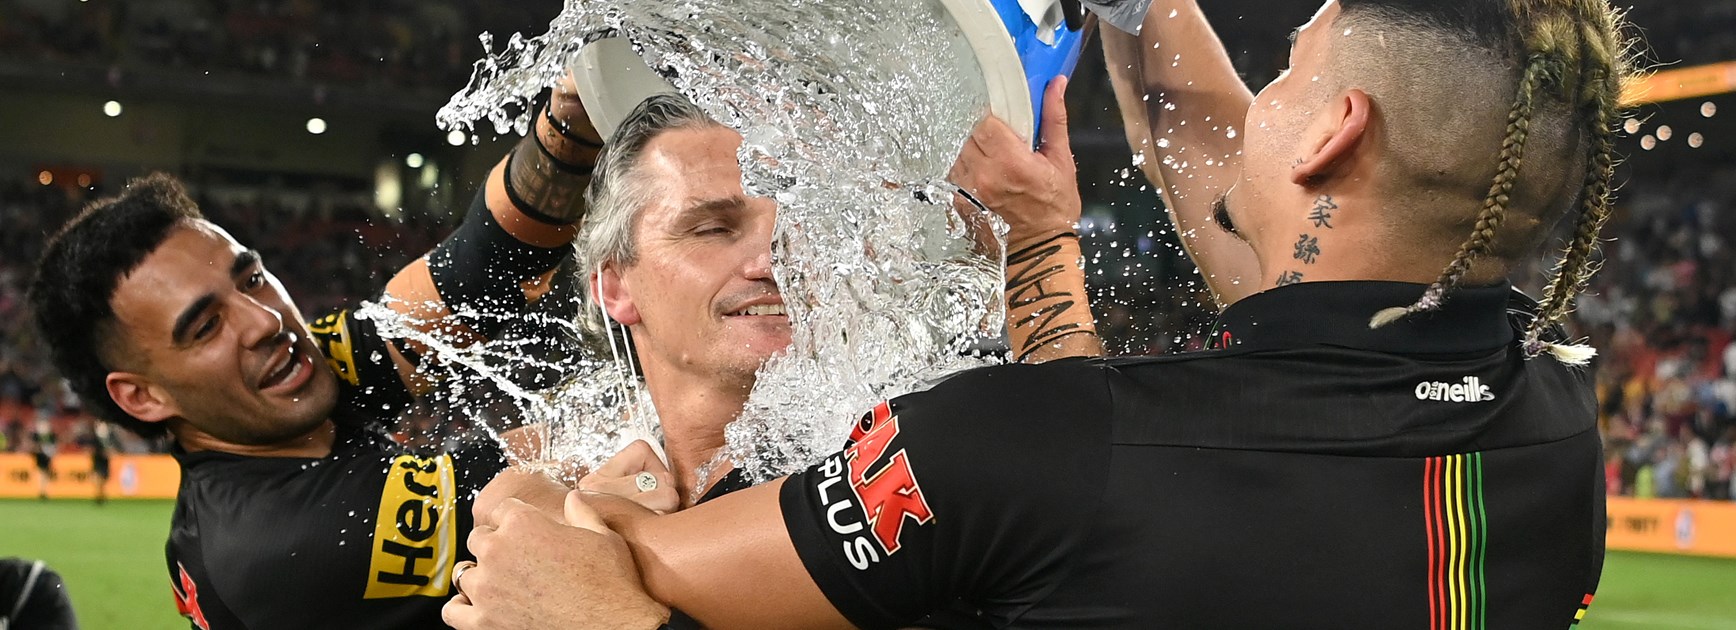 Ivan Cleary gets an unexpected shower after the game.